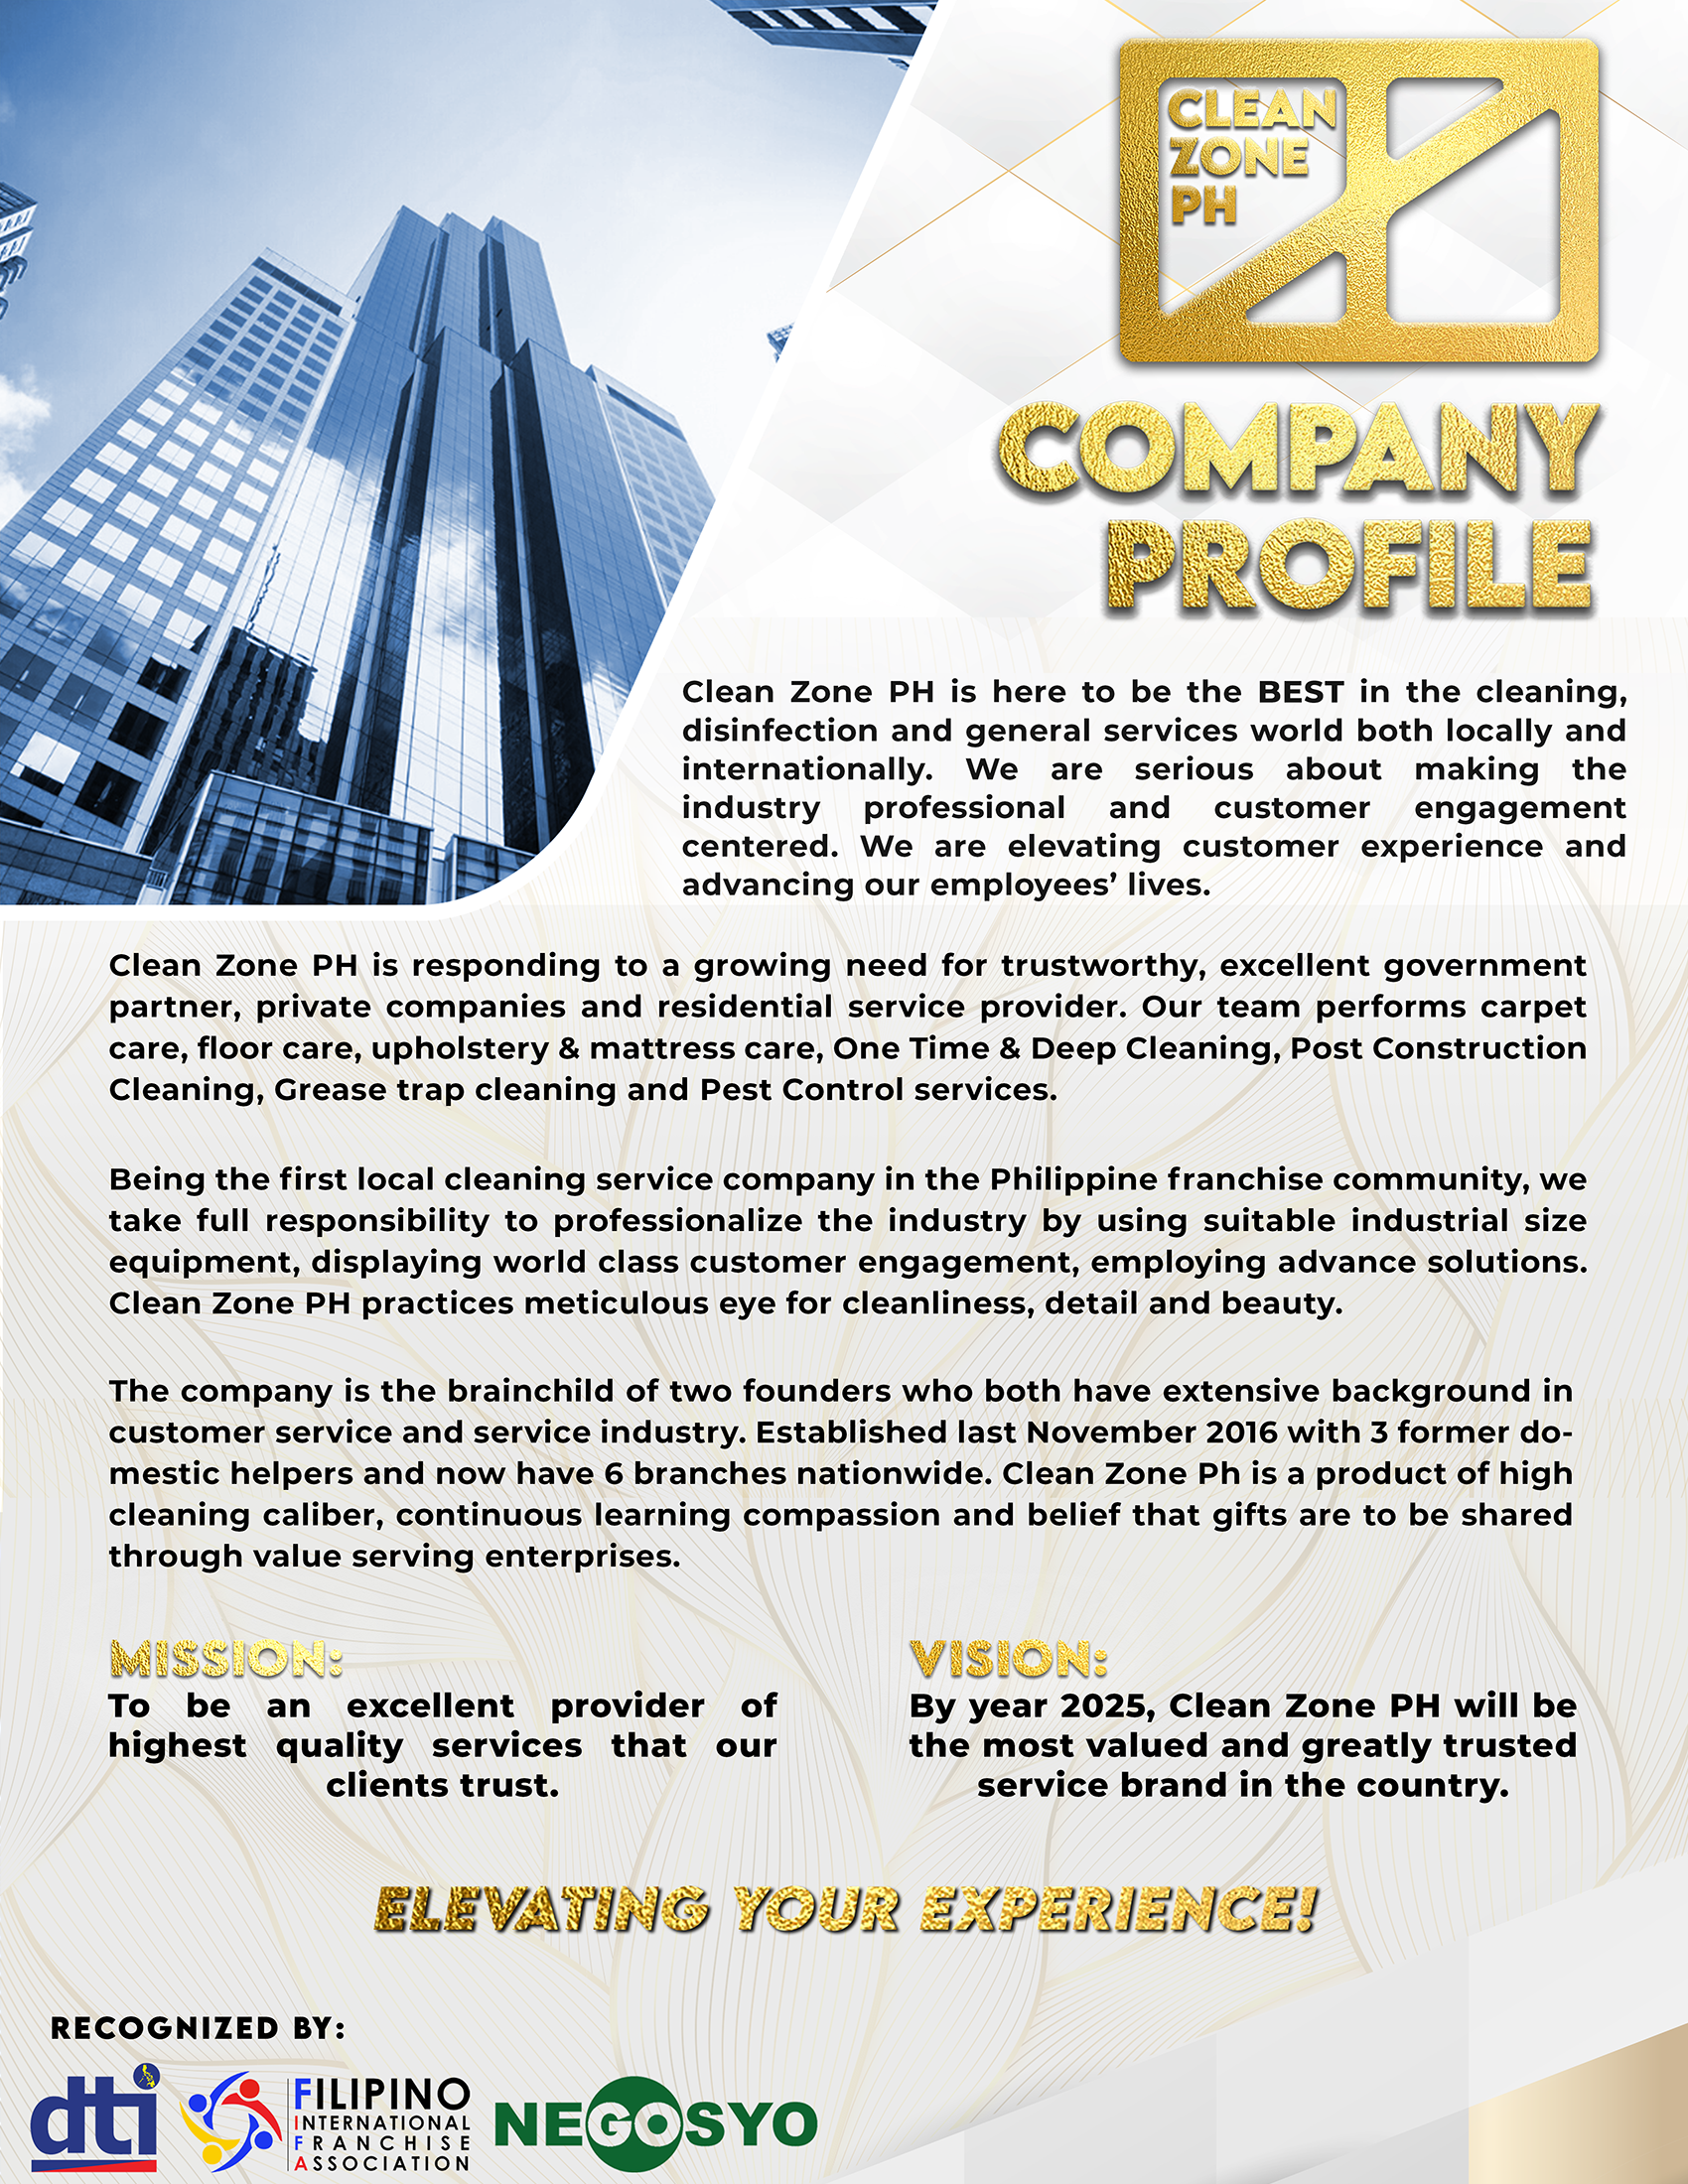 Clean Zone PH Company Profile Elevating Your Experience